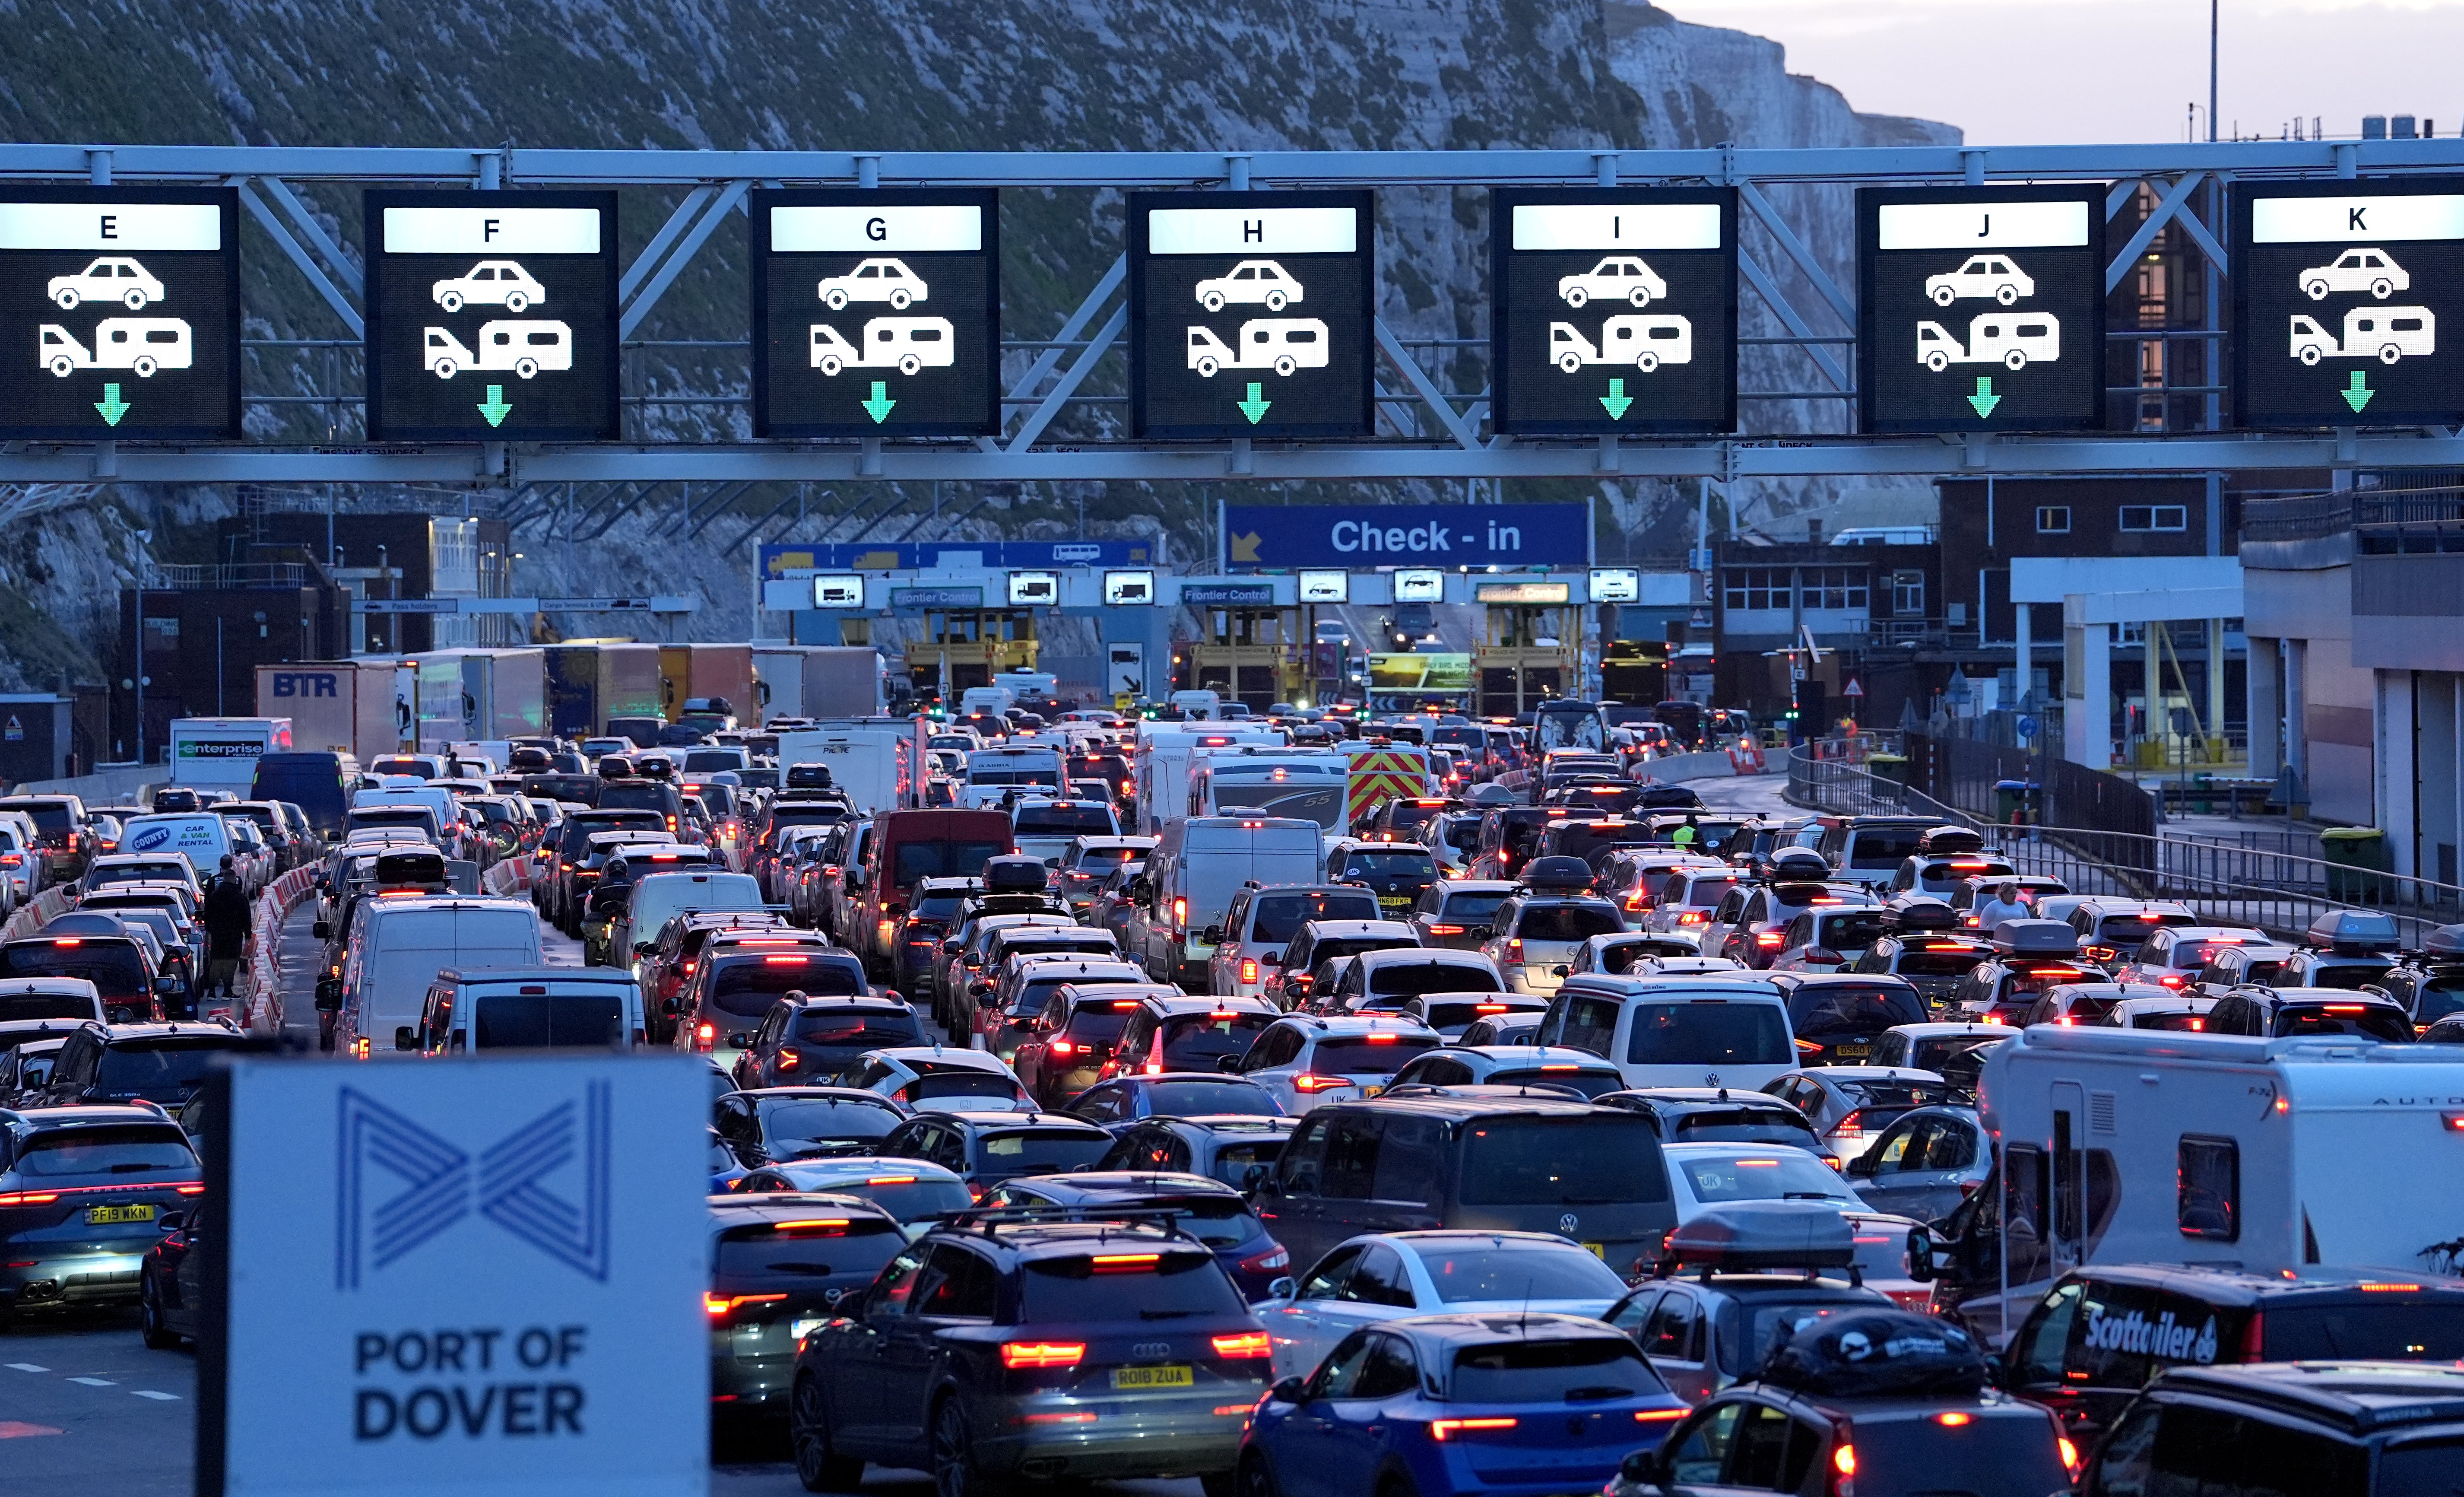 Passengers queue for ferries at the Port of Dover in Kent